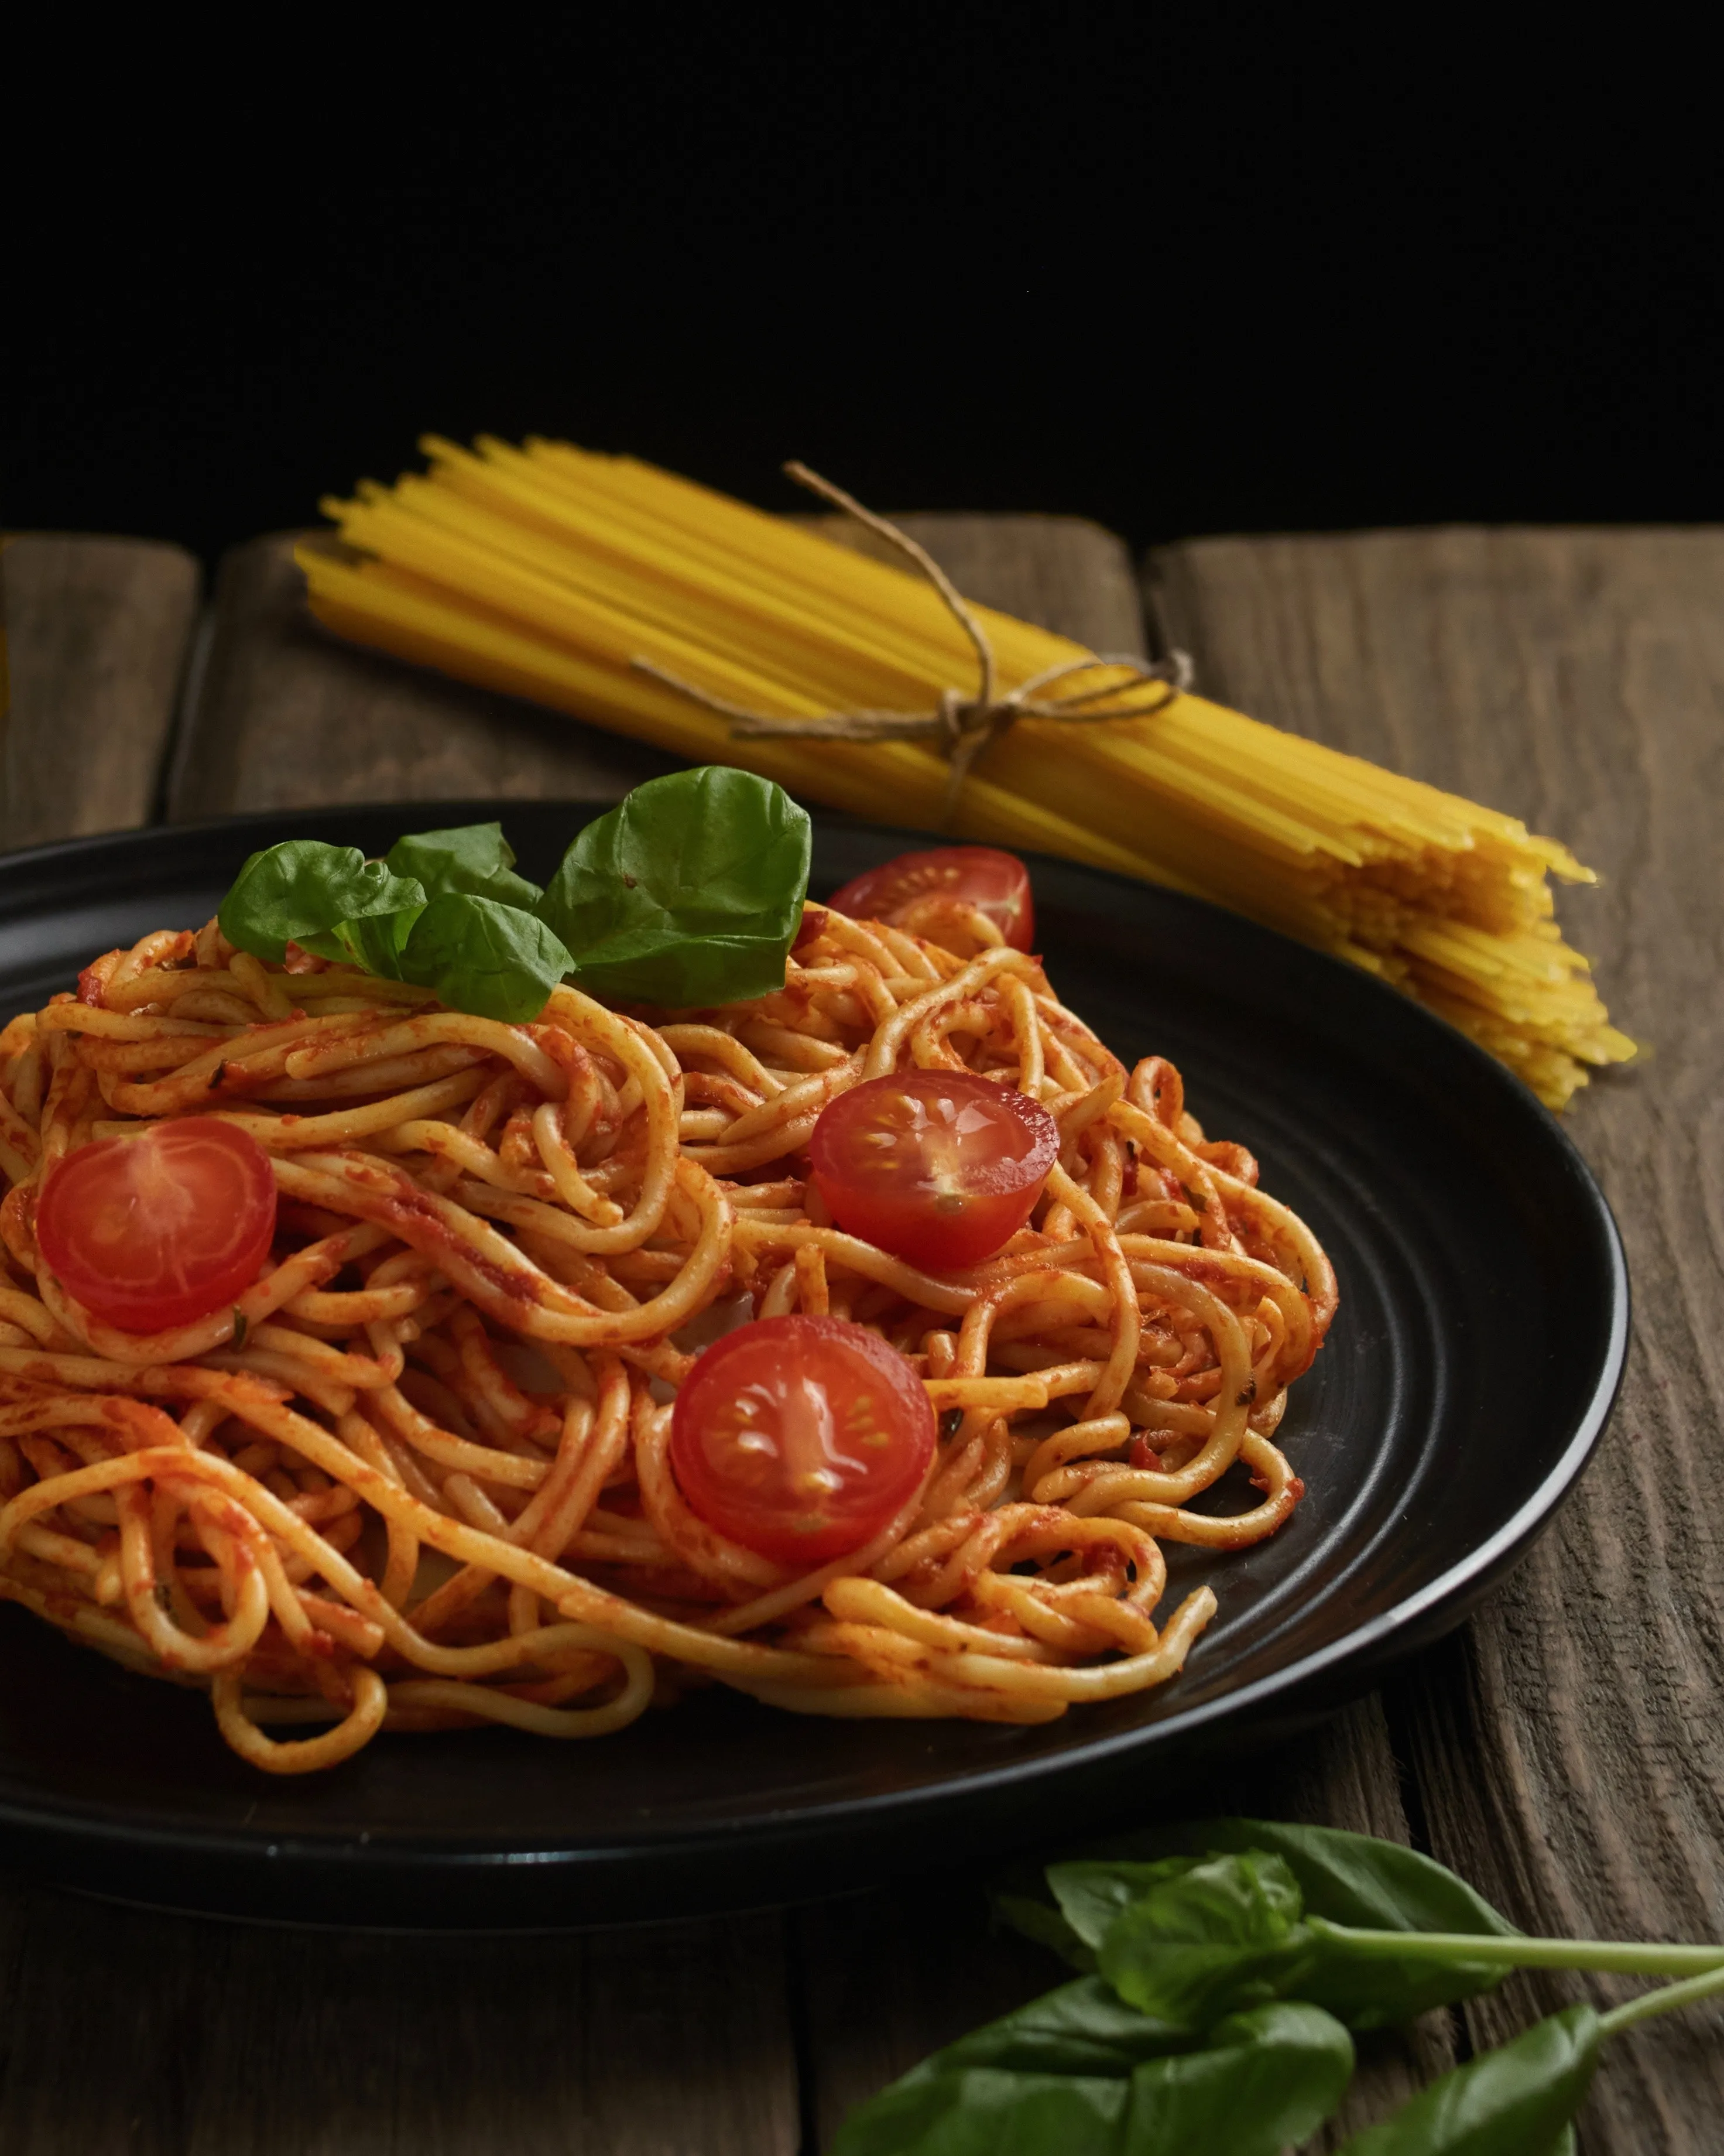 Pasta and sauces | Aulcorp